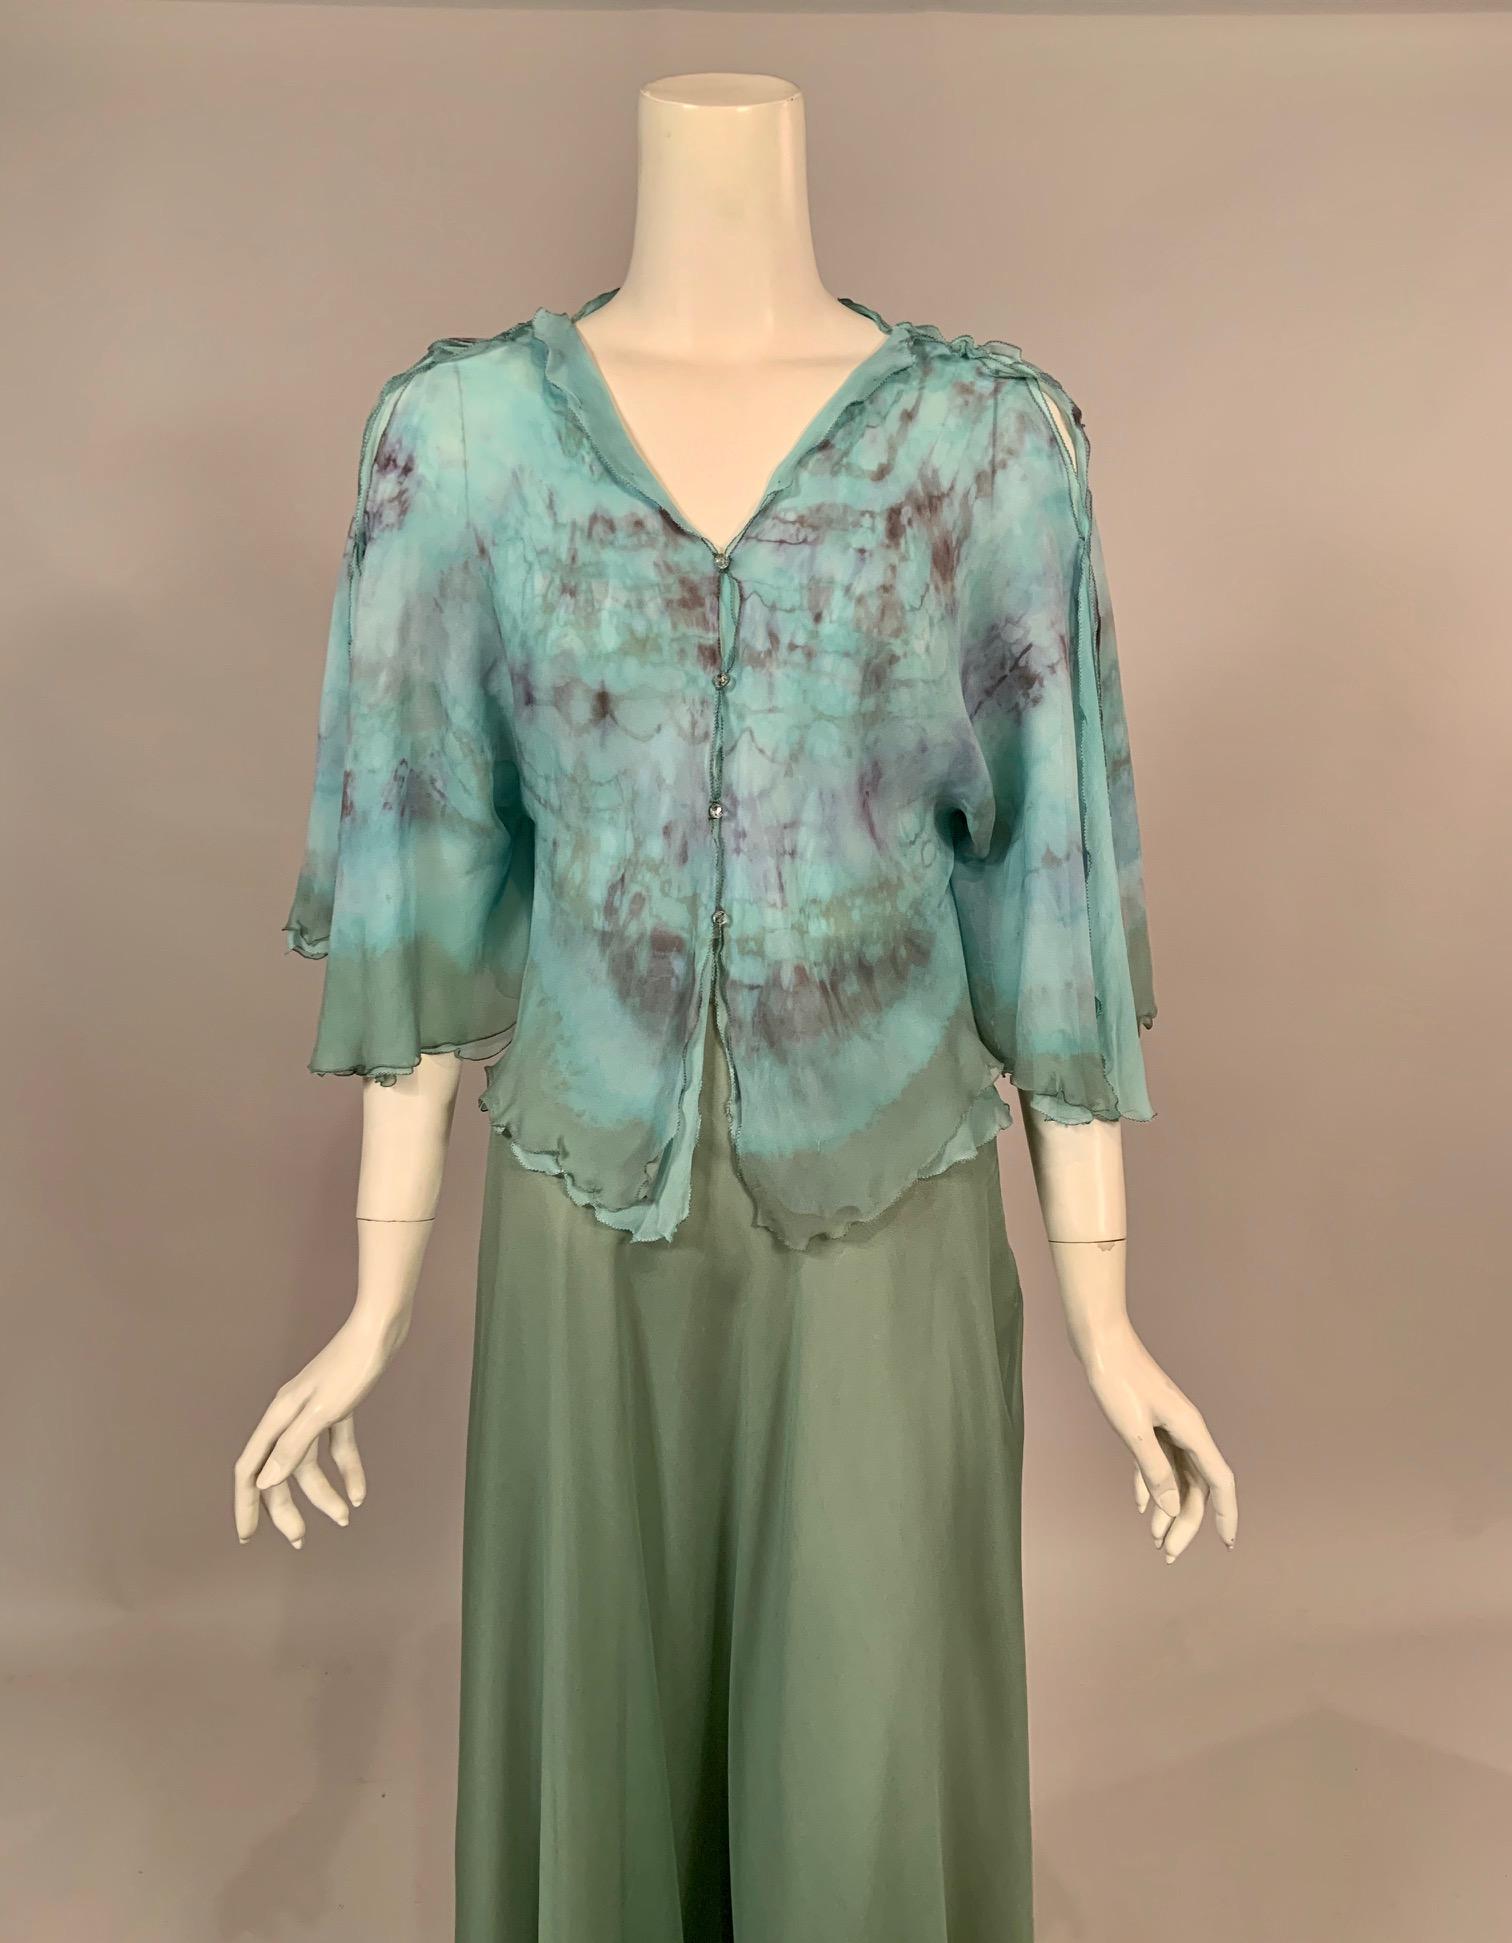 Made especially for Henri Bendel this two piece silk chiffon dress may have been inspired by the tie dye designs Halston was doing at this same time. The blouse is made from two layers of silk chiffon in a beautiful shade of blue. The top layer is